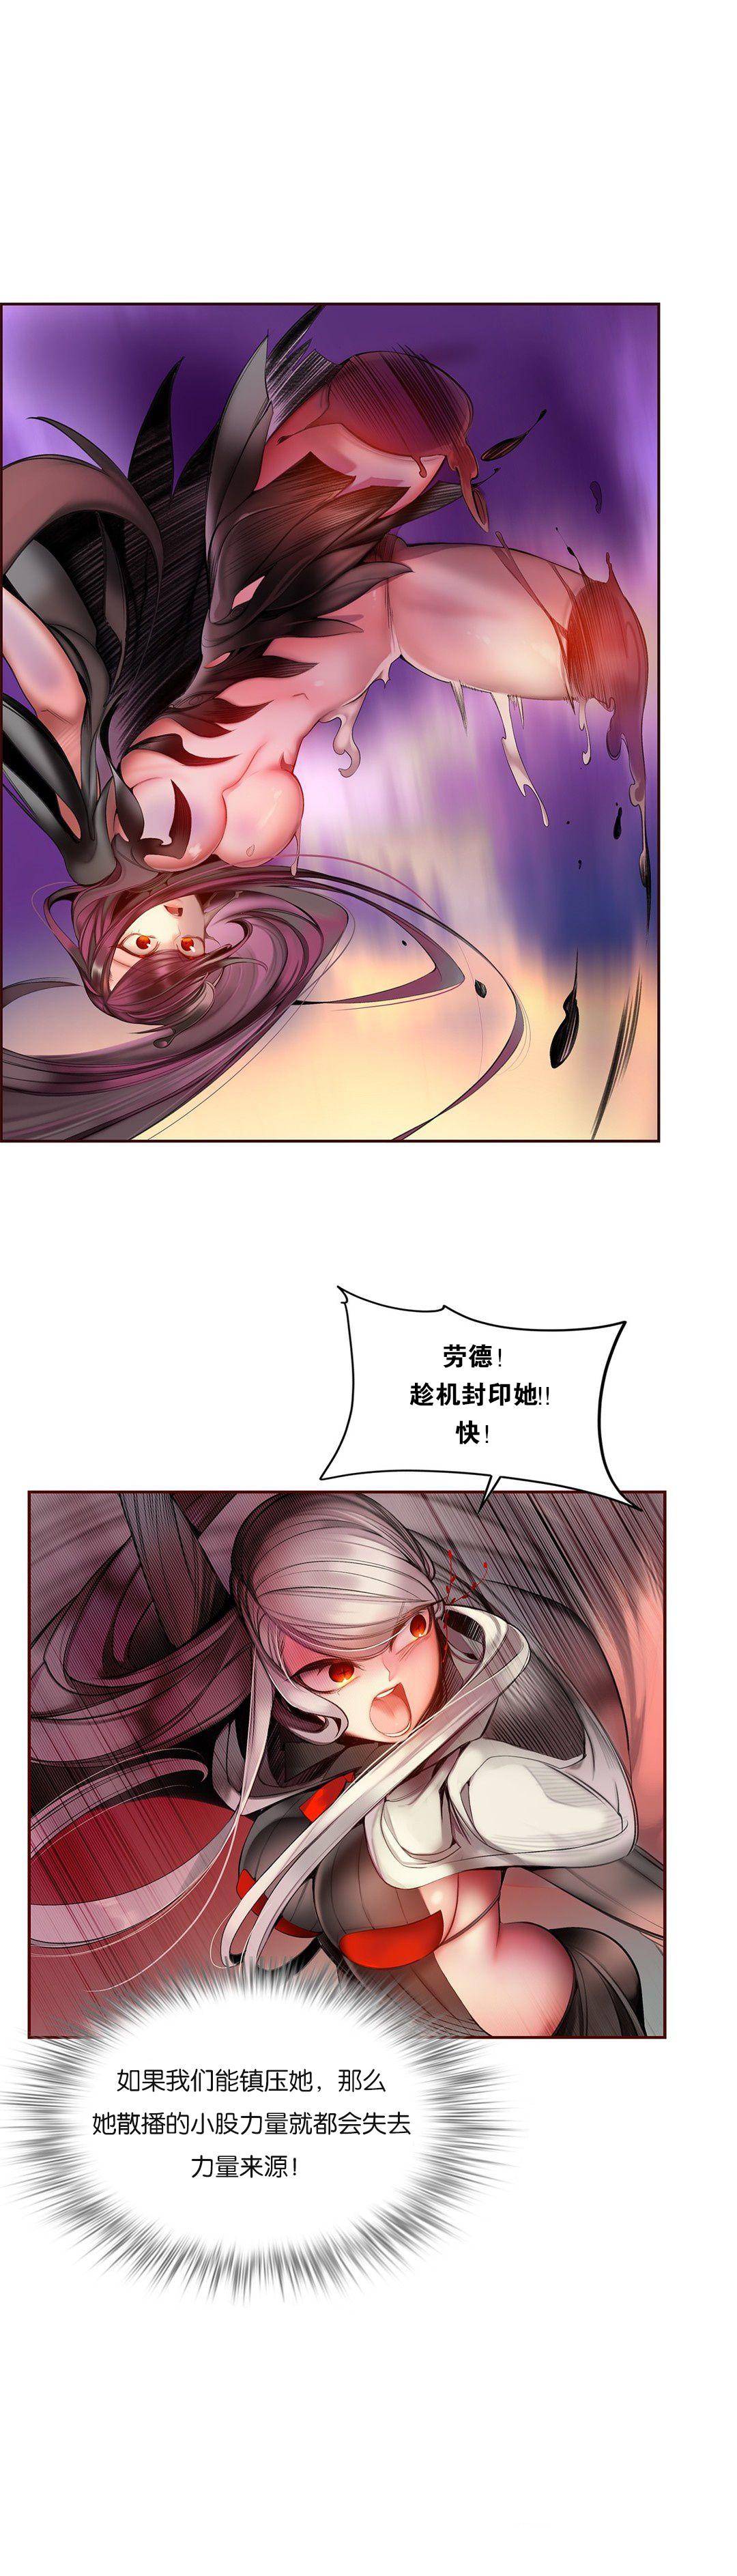 [Juder] Lilith`s Cord (第二季) Ch.61-64 [Chinese] [aaatwist个人汉化] [Ongoing] 91